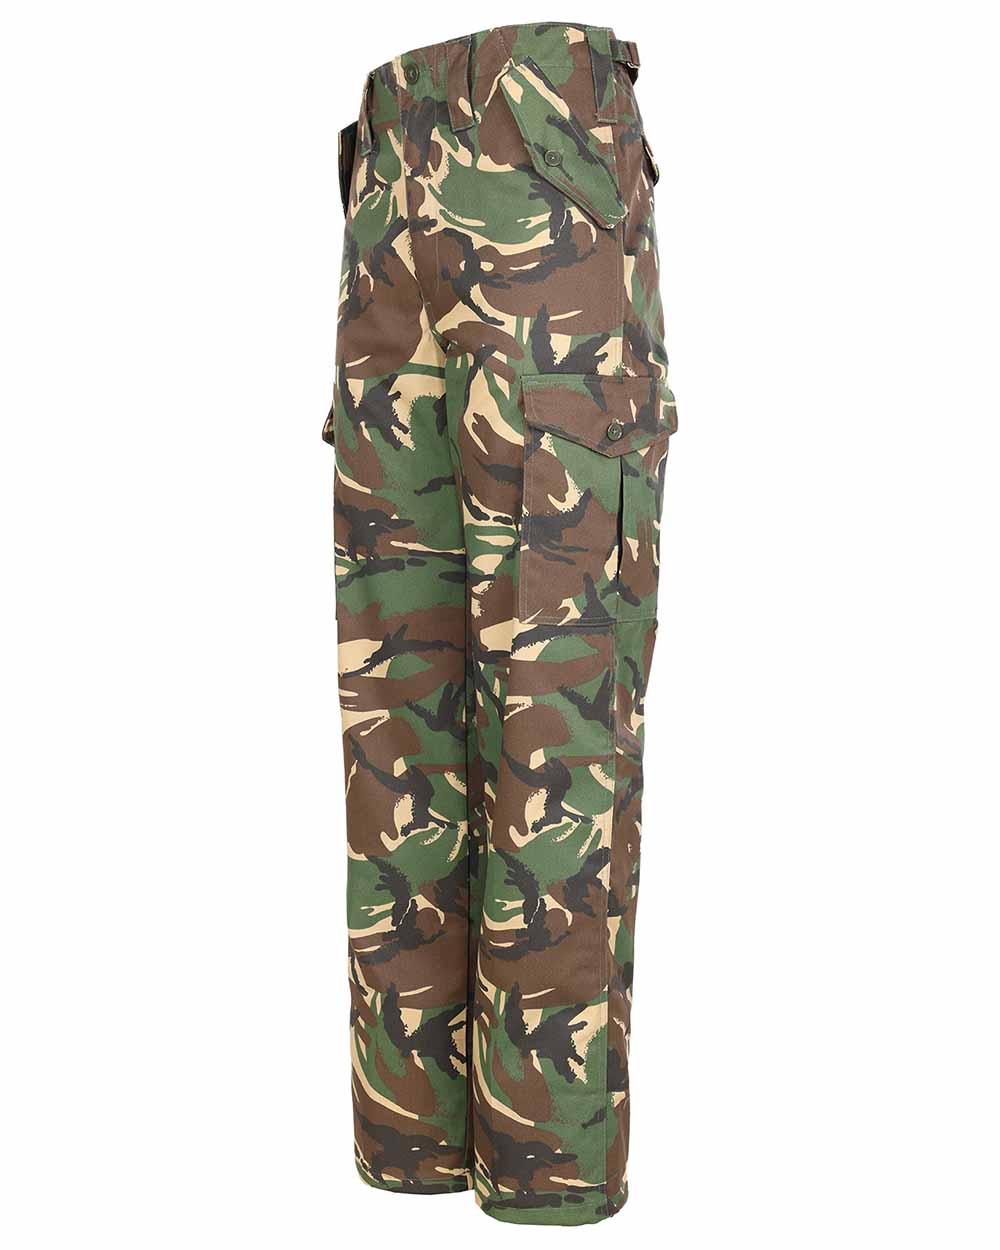 Woodland Camouflage Fort Camo Combat Trousers 